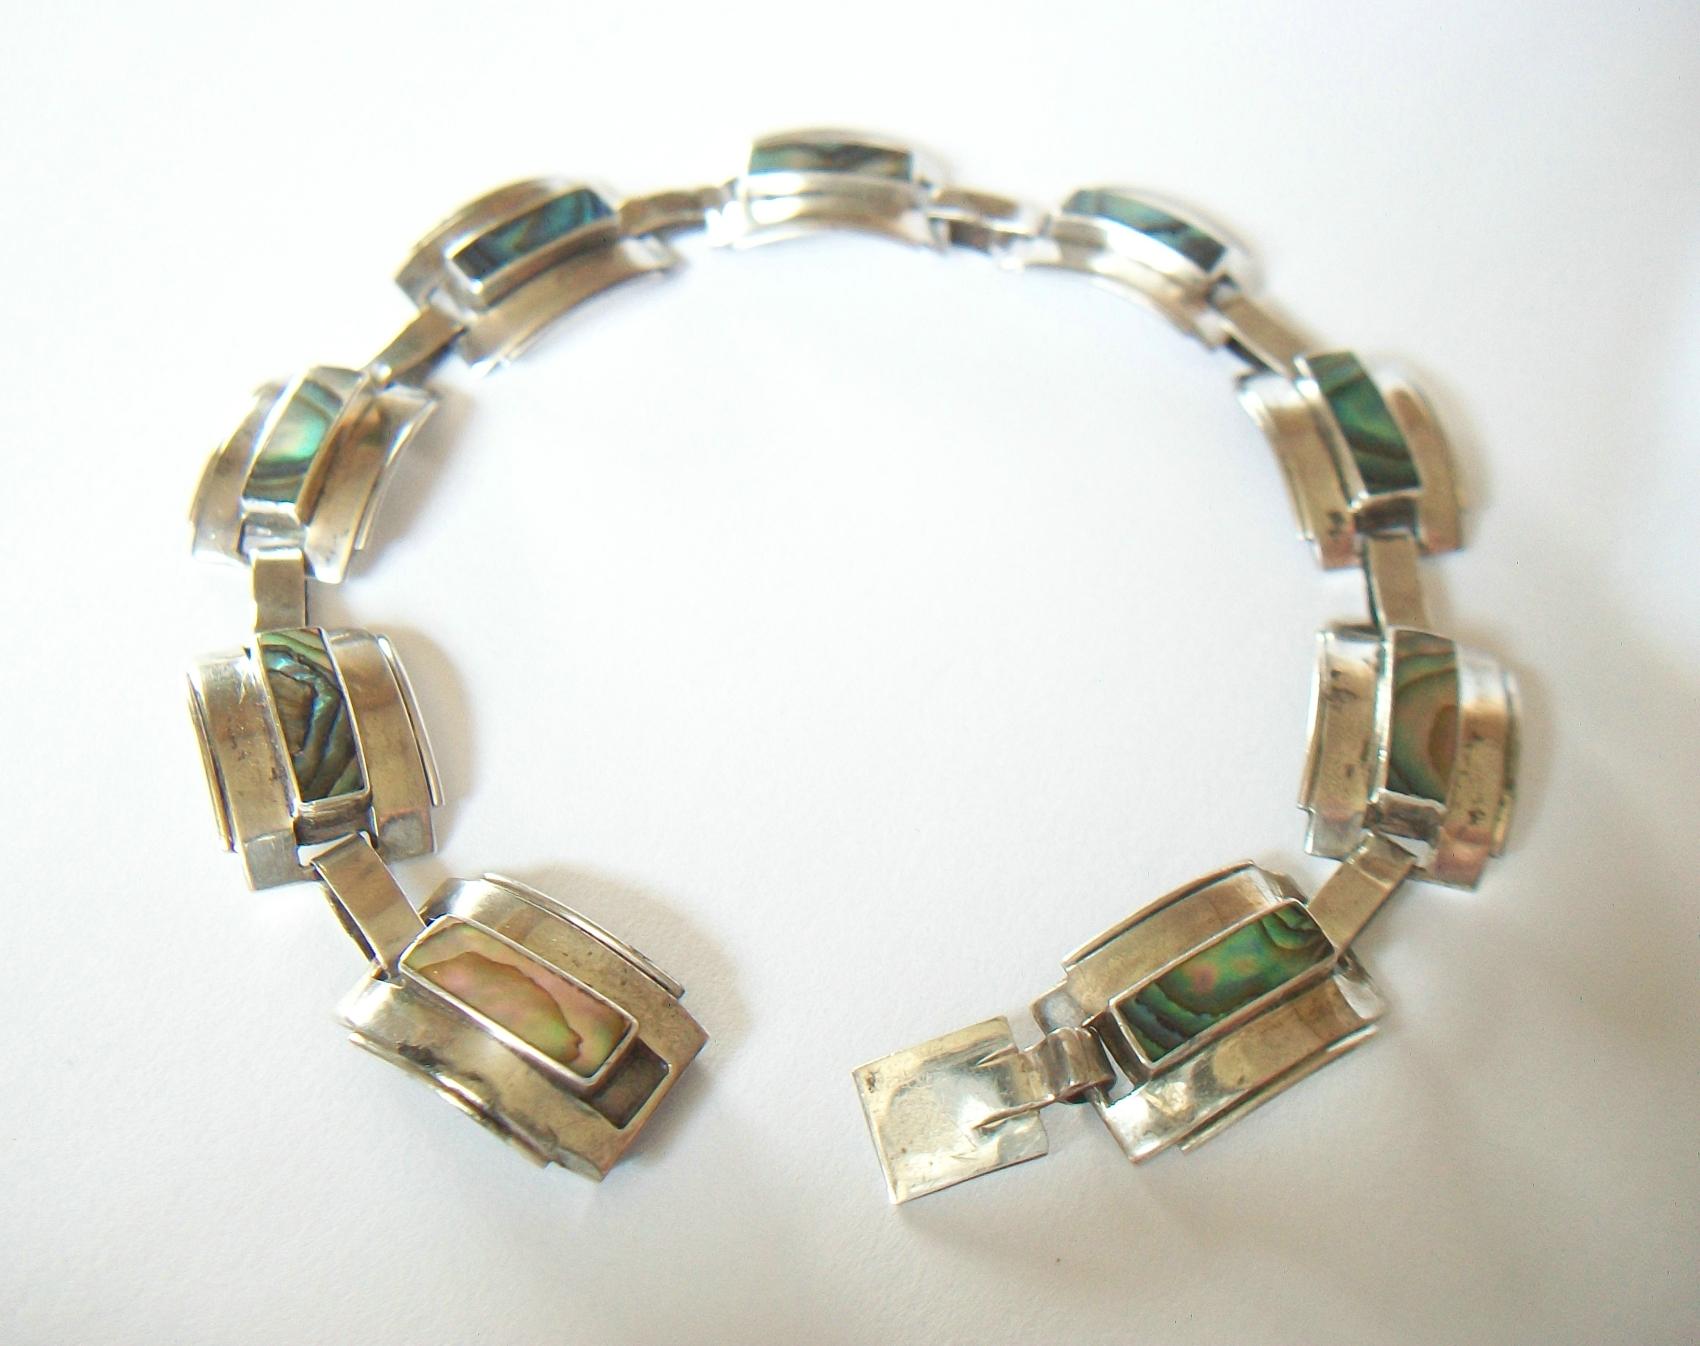 Modernist Sterling Silver & Abalone Link Bracelet - Mexico - Circa 1950's For Sale 3